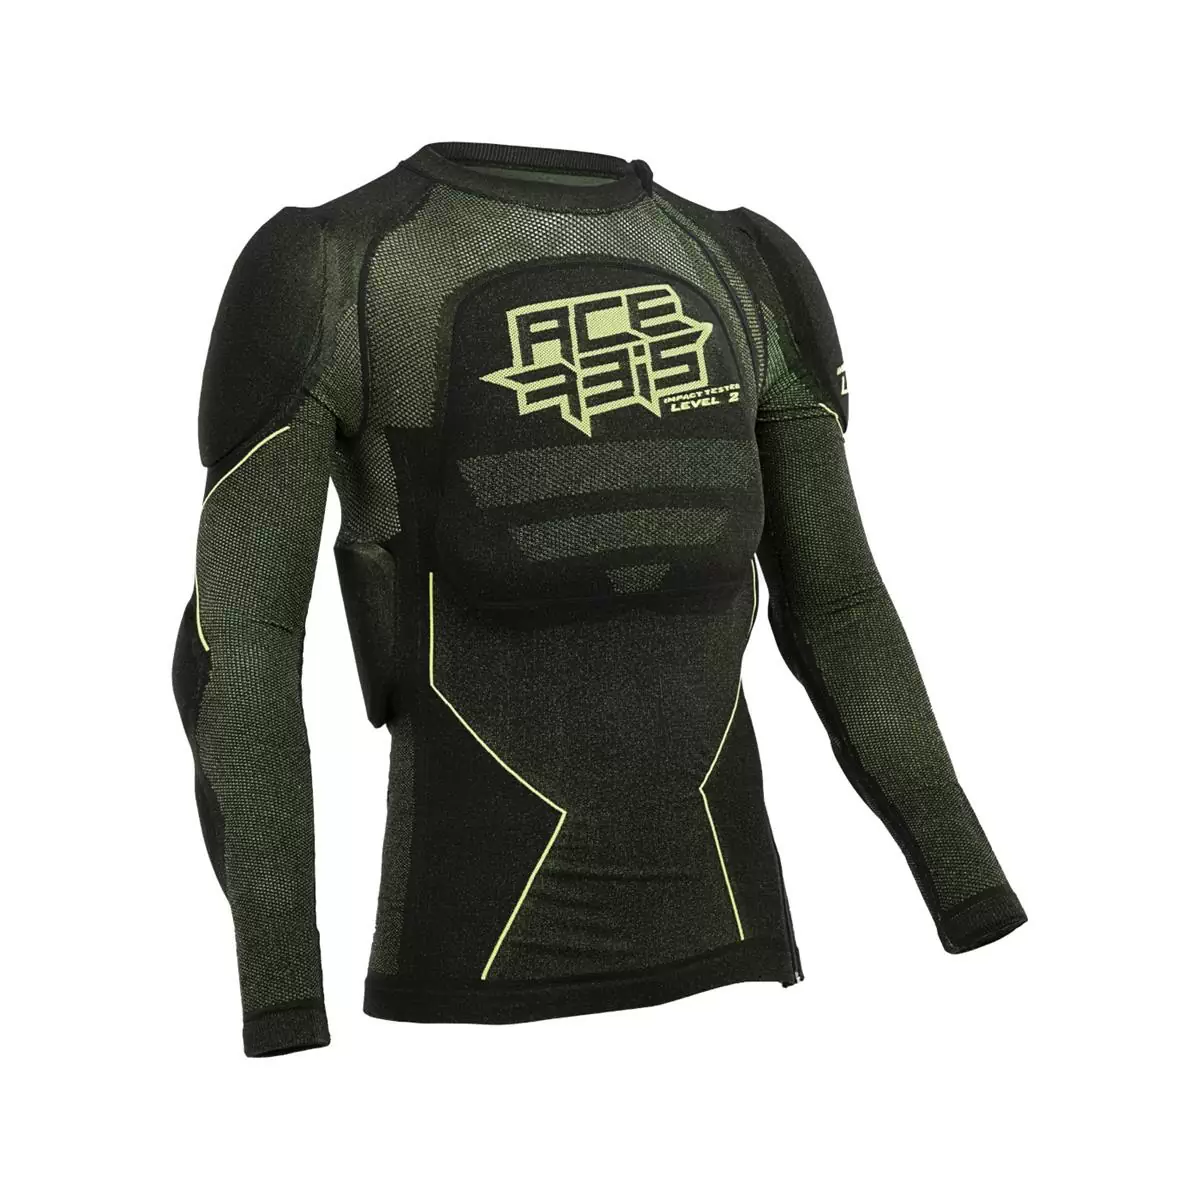 Body Armour X-Fit Future Level 2 Black/Yellow Size L/XL - image